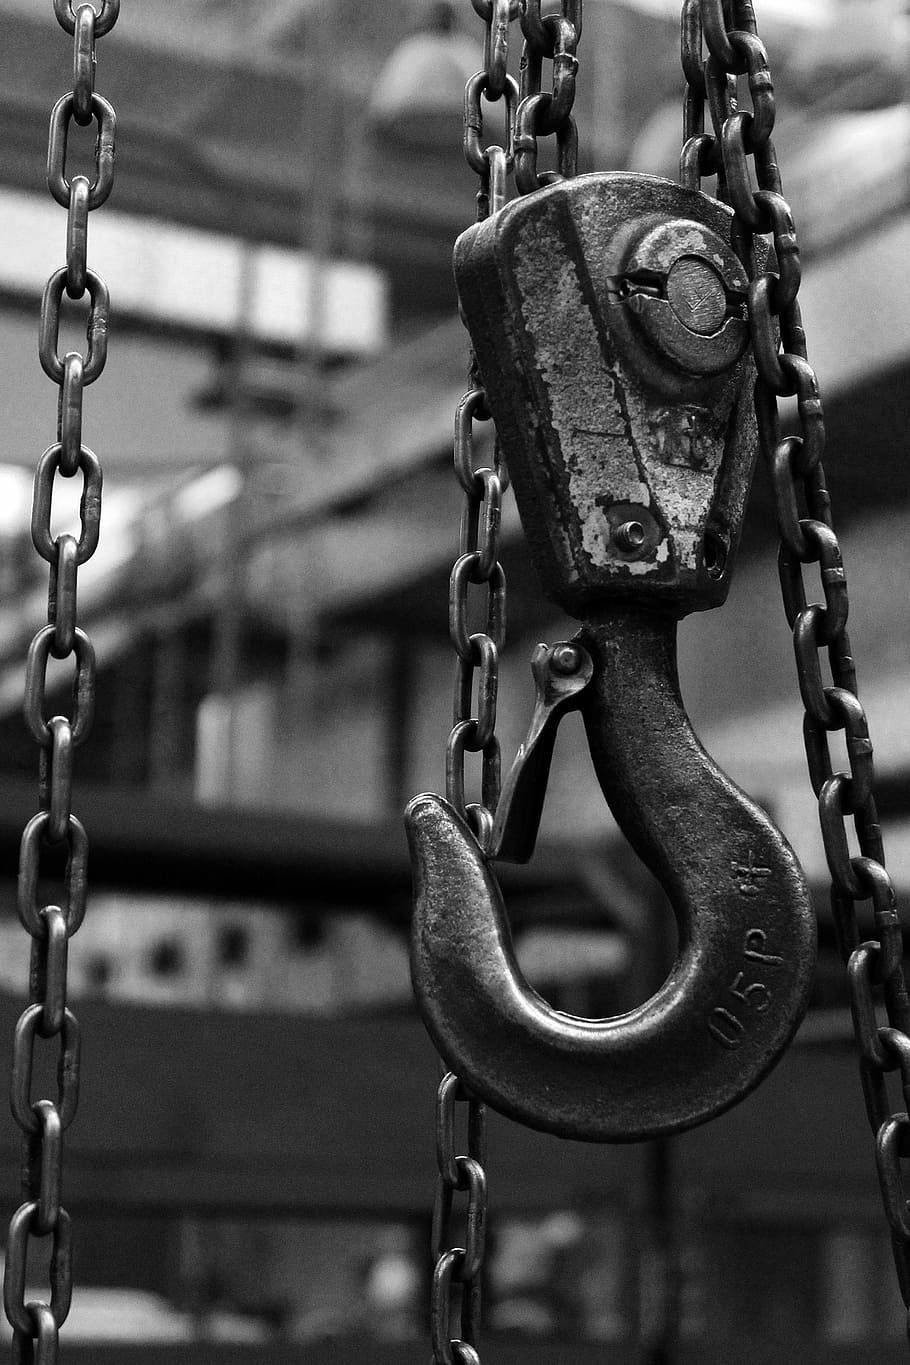 metal hook grayscale photo, hook, metal, crane, black, chain, heavy, weight, black and white, focus on foreground